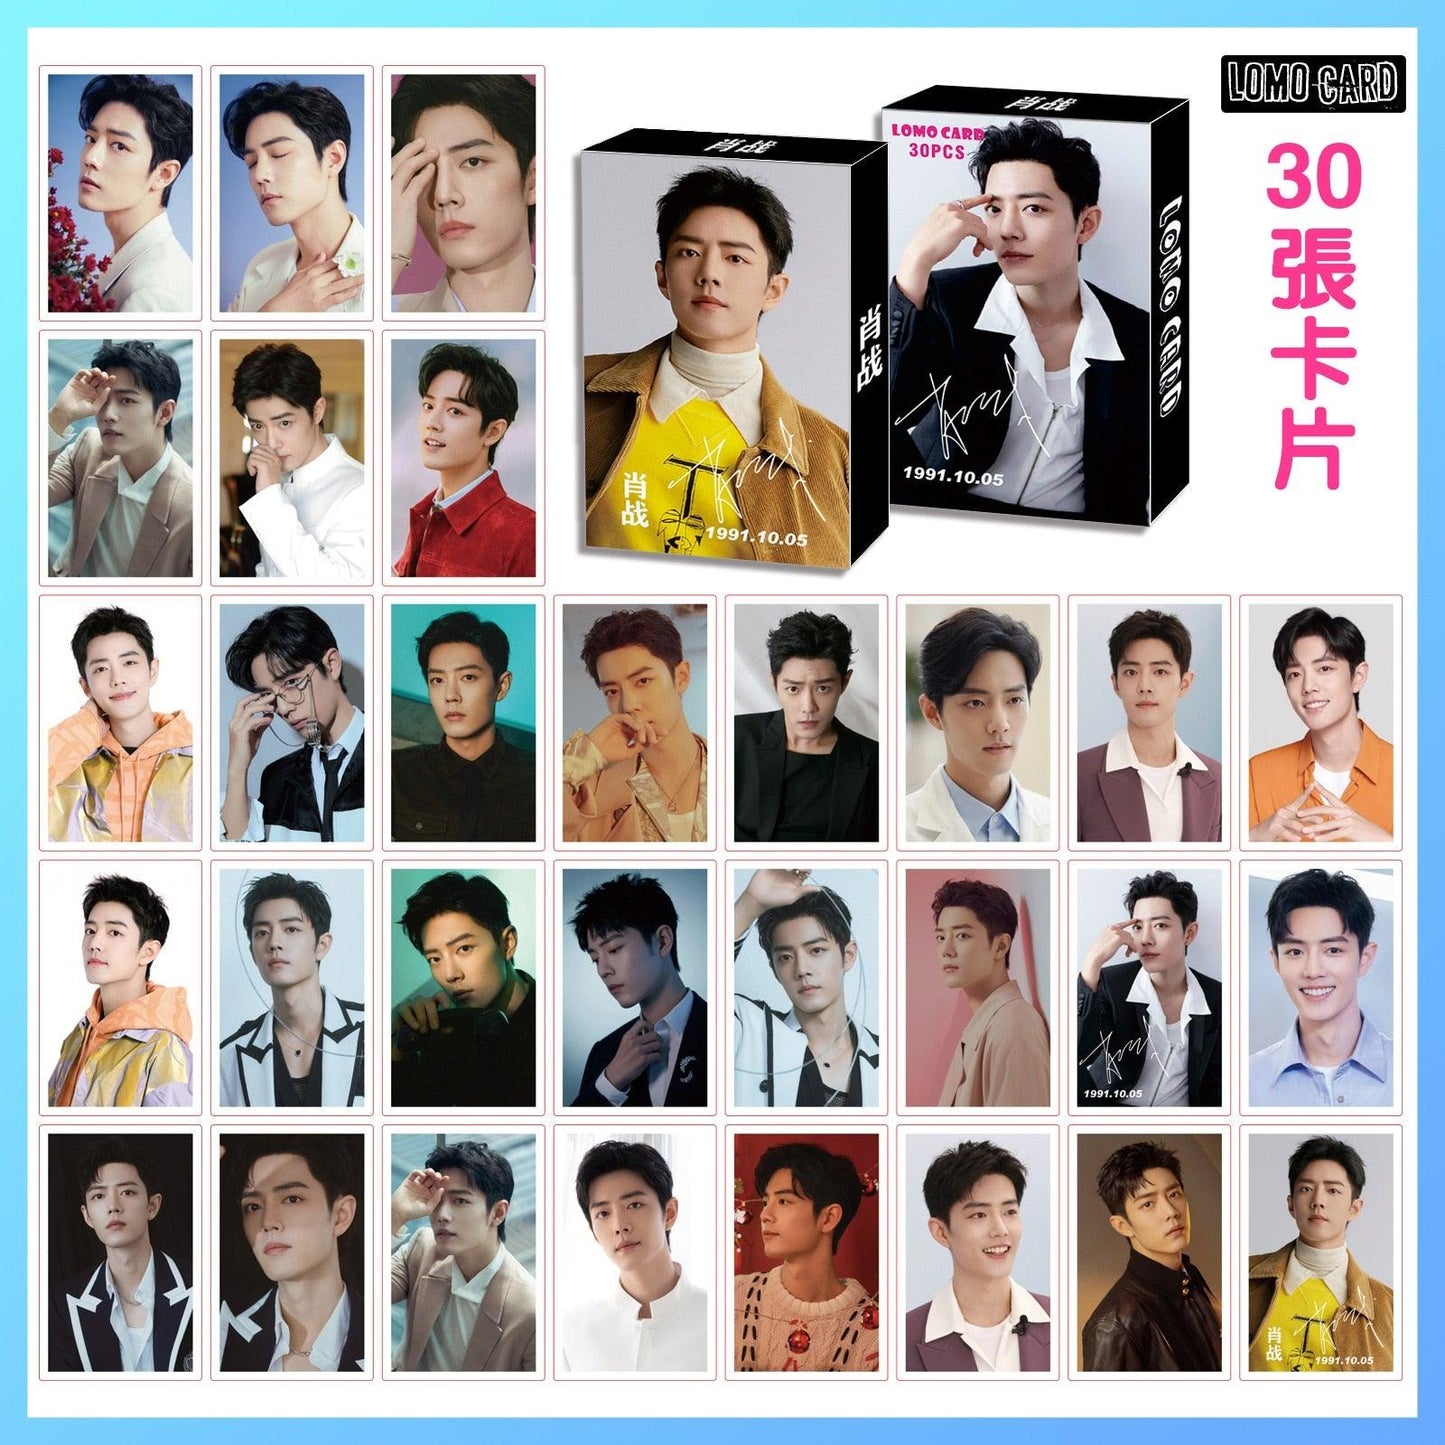 30PCS/Set The Untamed Wang Yibo Xiaozhan Postcard LOMO Card Small Card Greeting Card Photo Cards For Fans Collection Gift